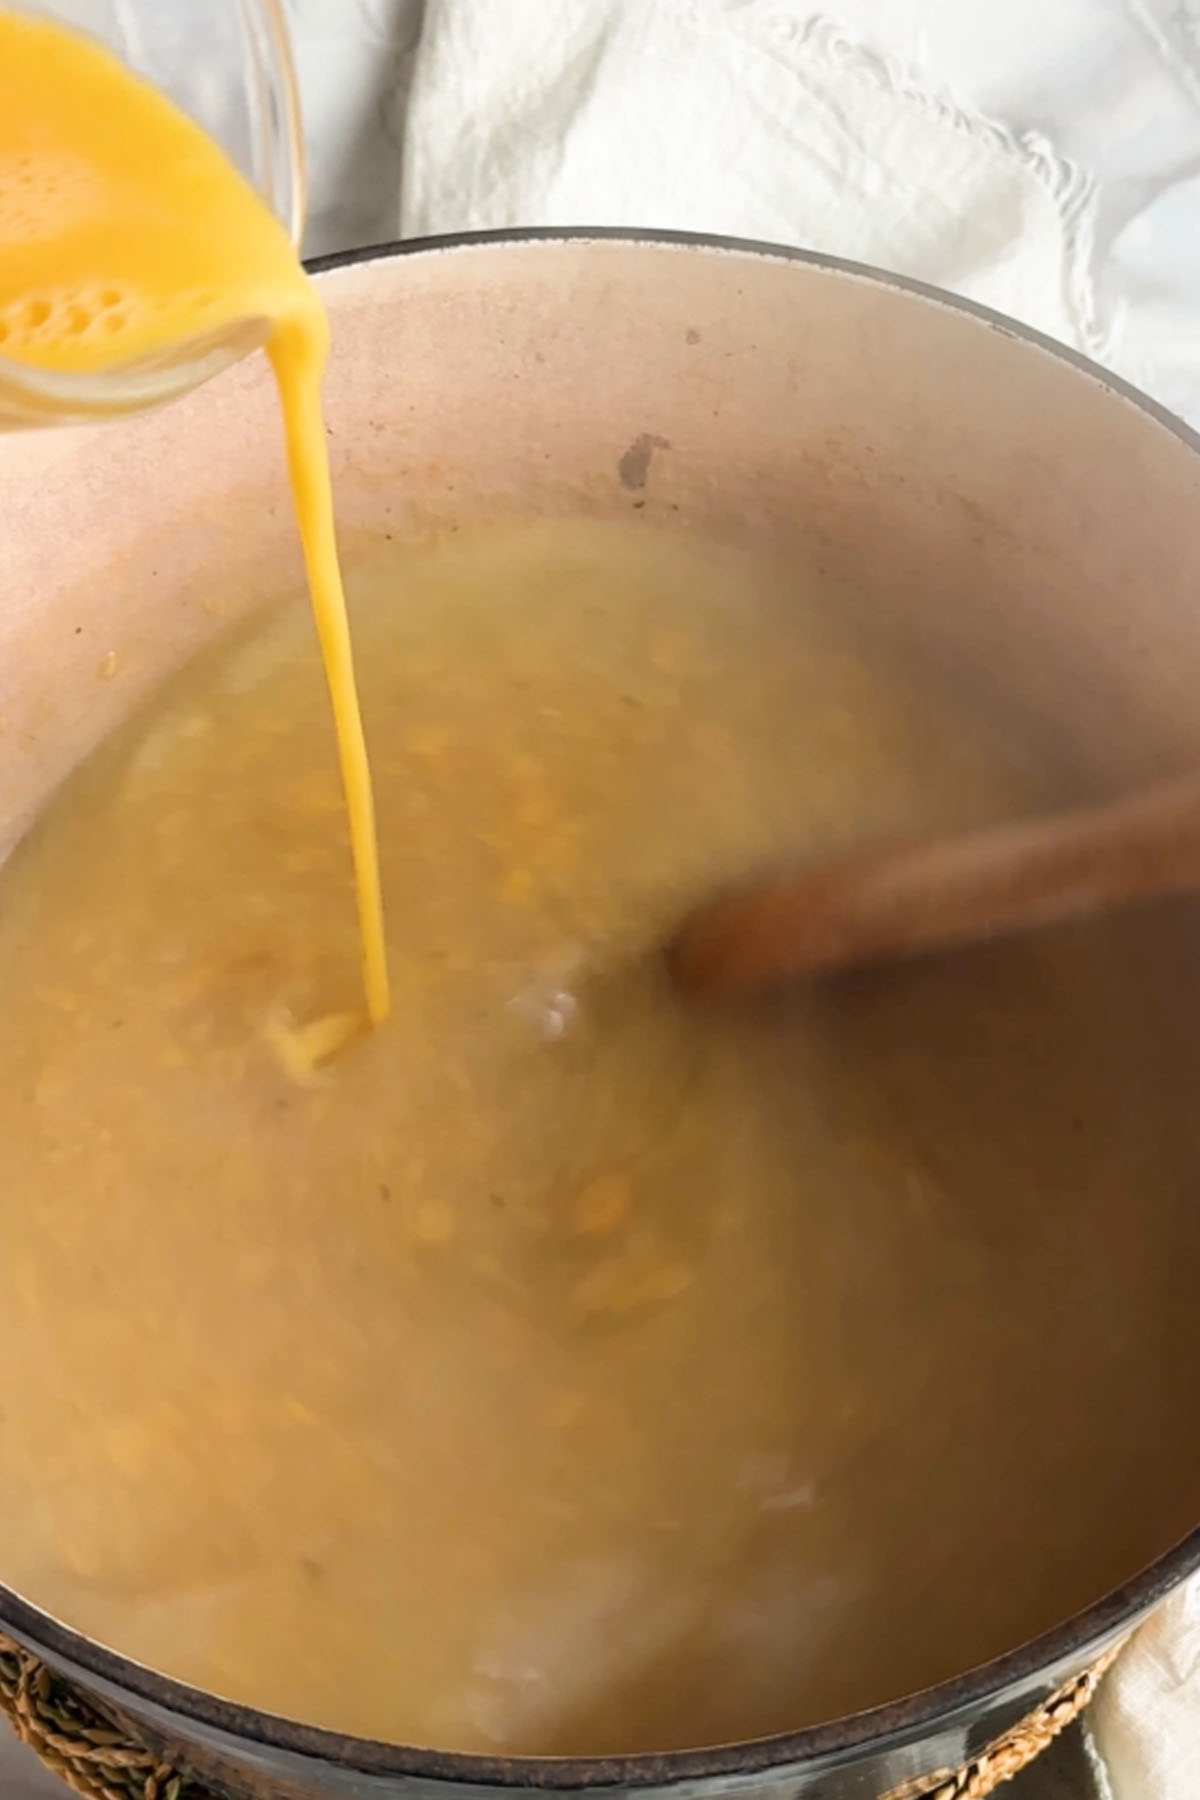 Eggs are poured in a thin line into broth.